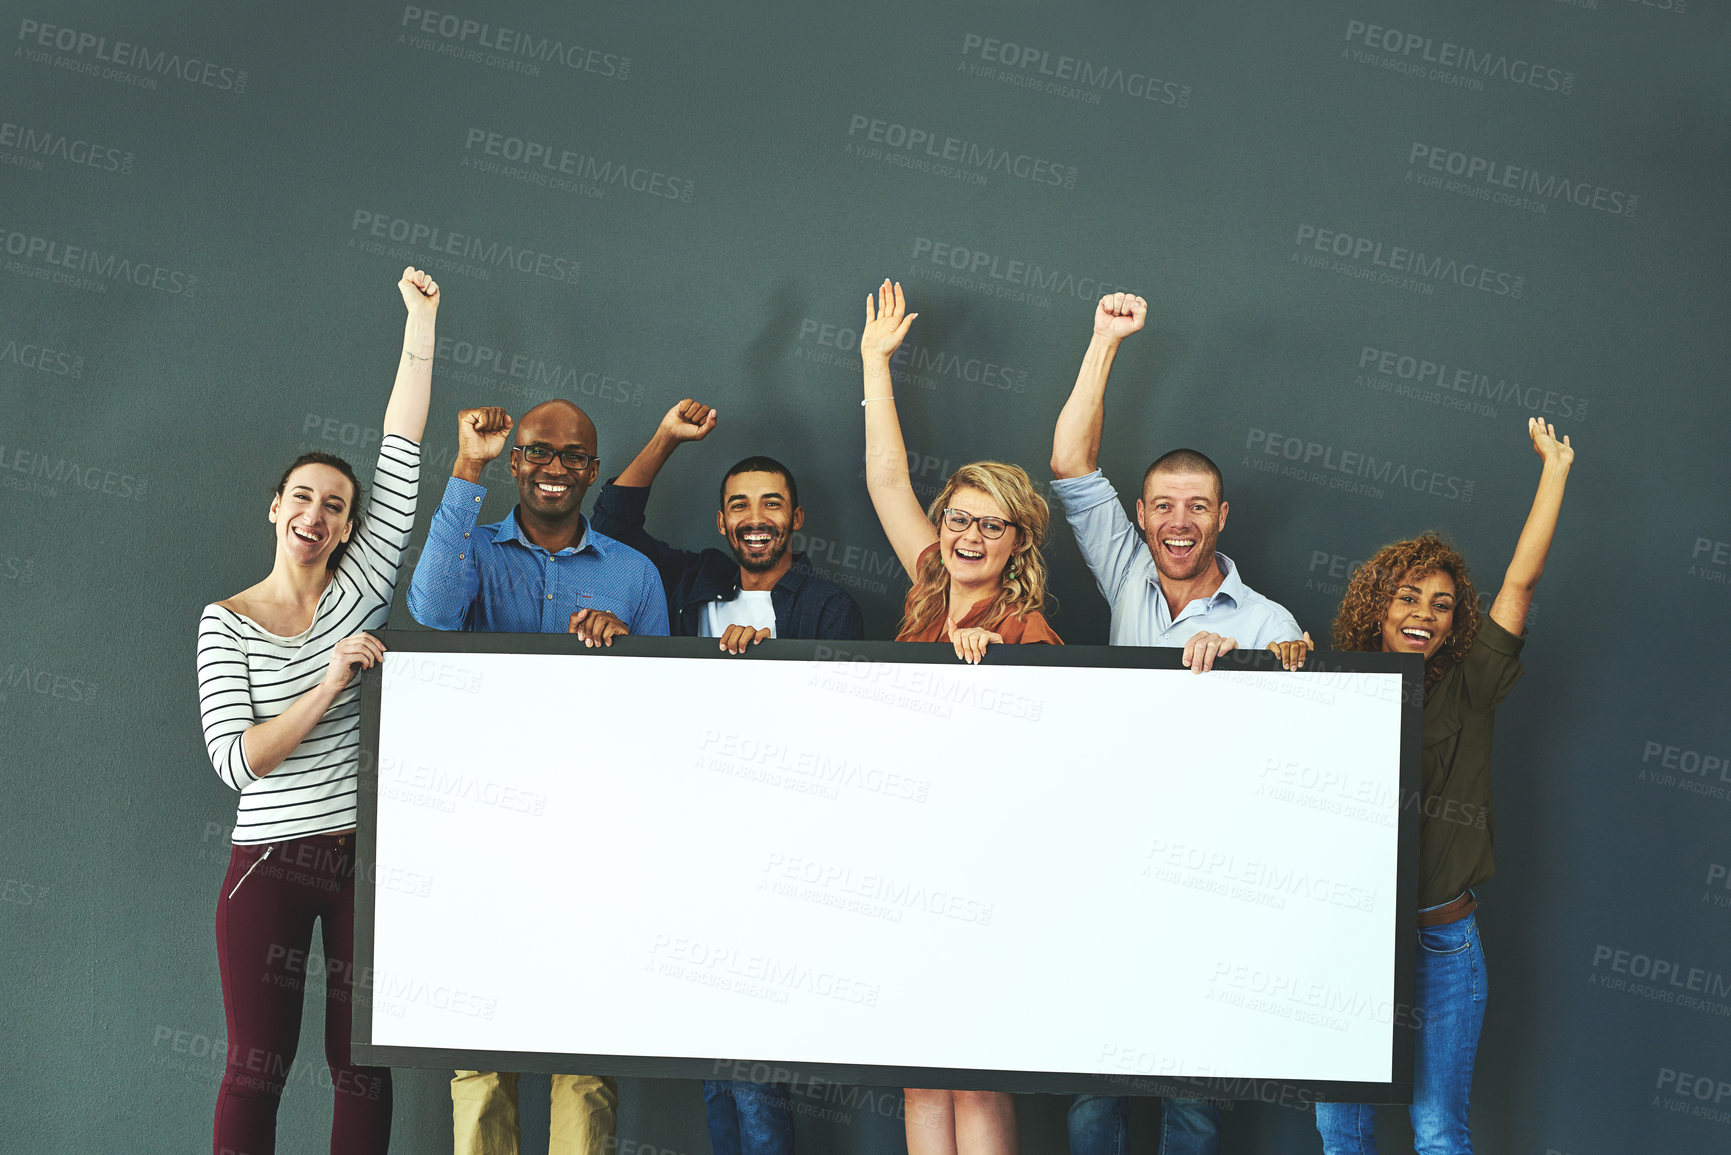 Buy stock photo Happy, diverse and cheering marketing team with a blank card, poster or billboard with copyspace in studio on a grey background. A group of smiling business people celebrating and endorsing a product